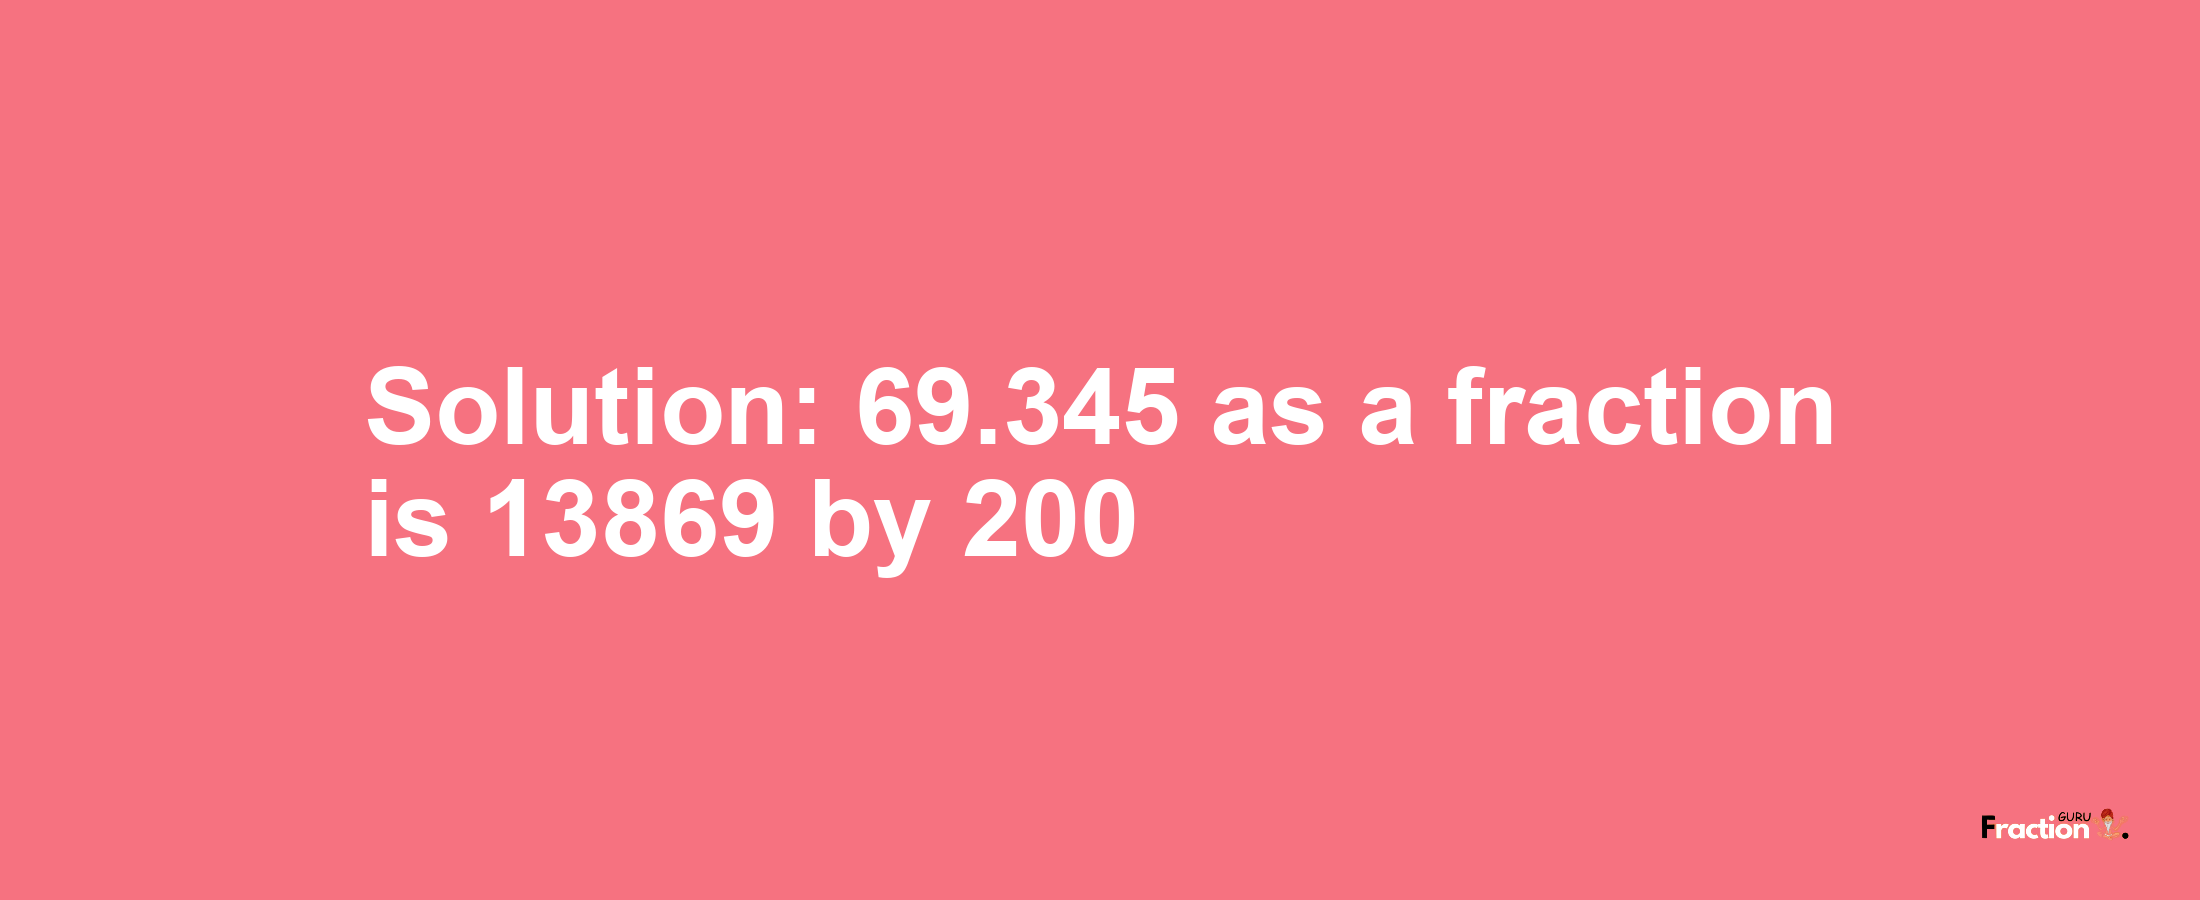 Solution:69.345 as a fraction is 13869/200